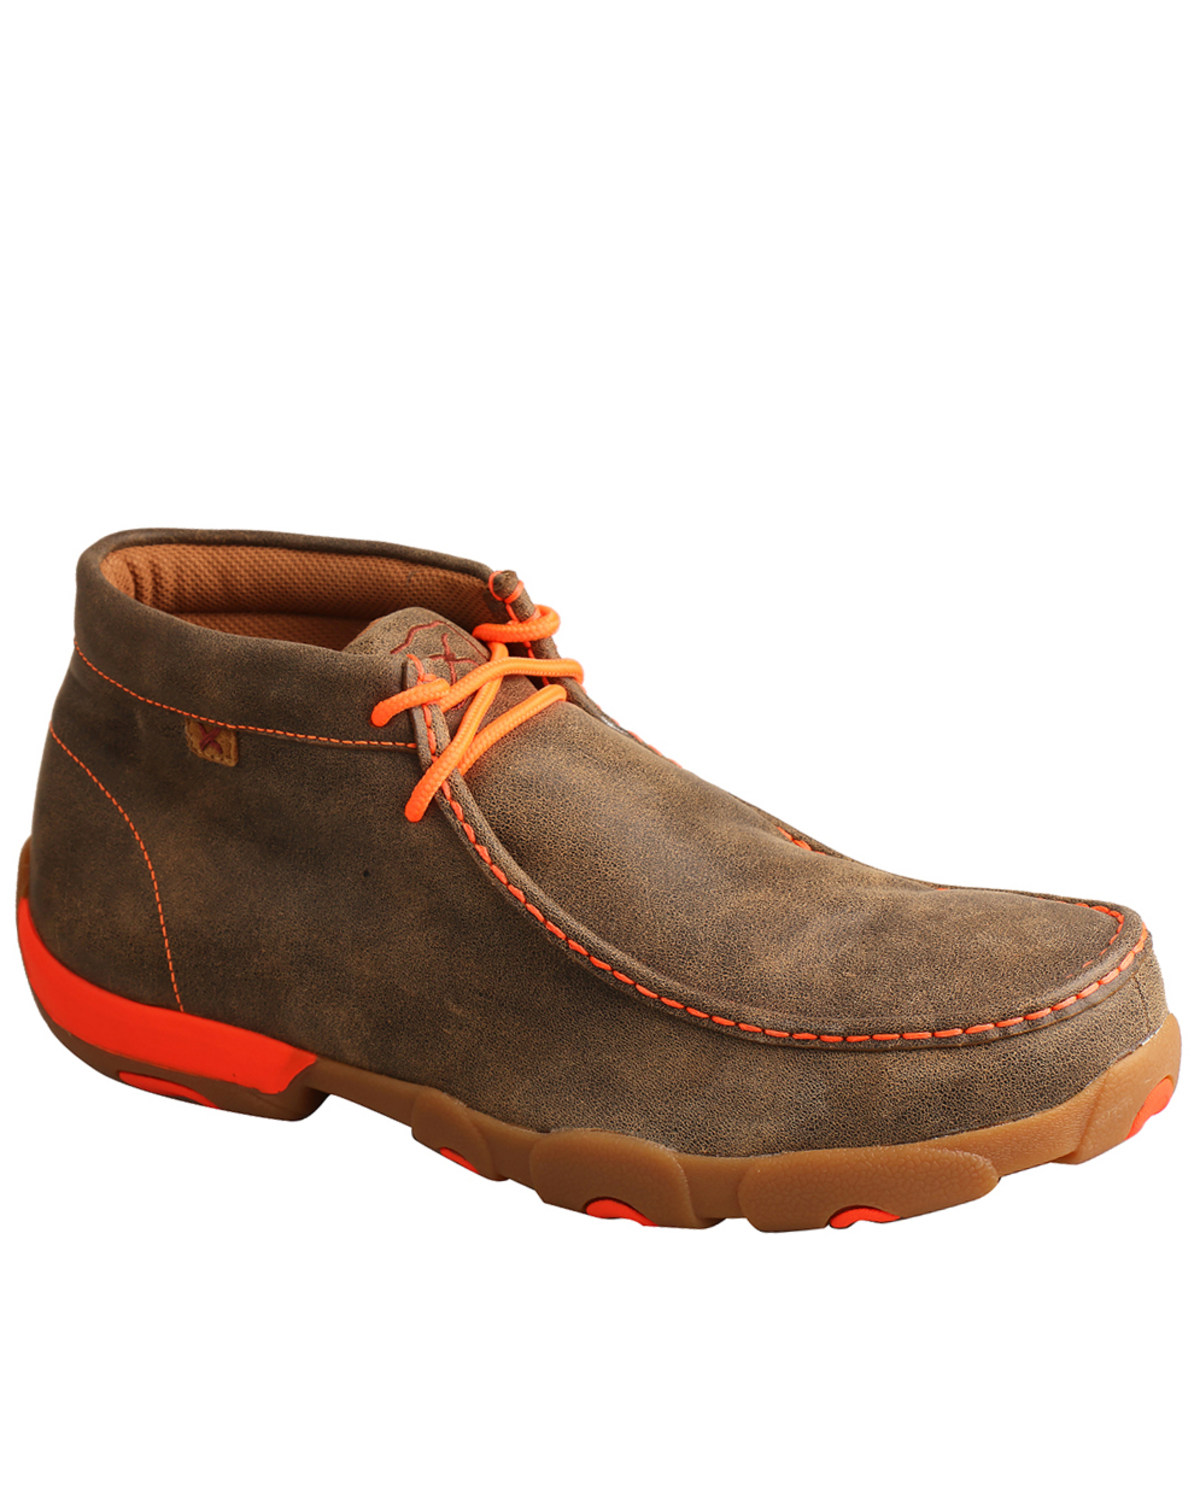 Twisted X Men's Work Chukka Driving Shoes - Steel Toe